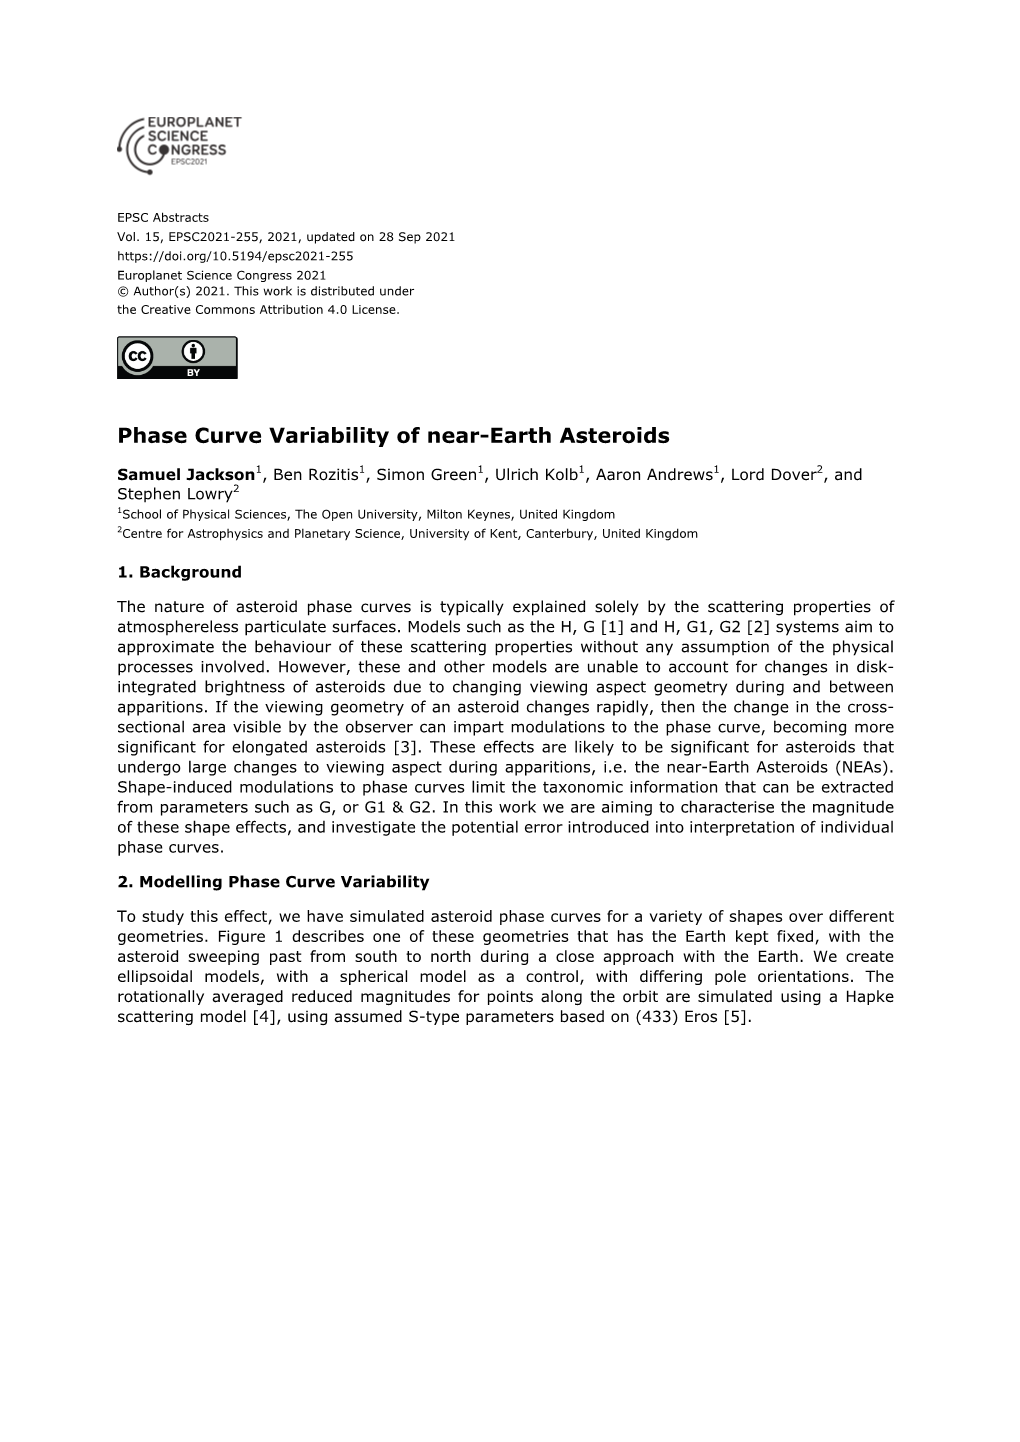 Phase Curve Variability of Near-Earth Asteroids